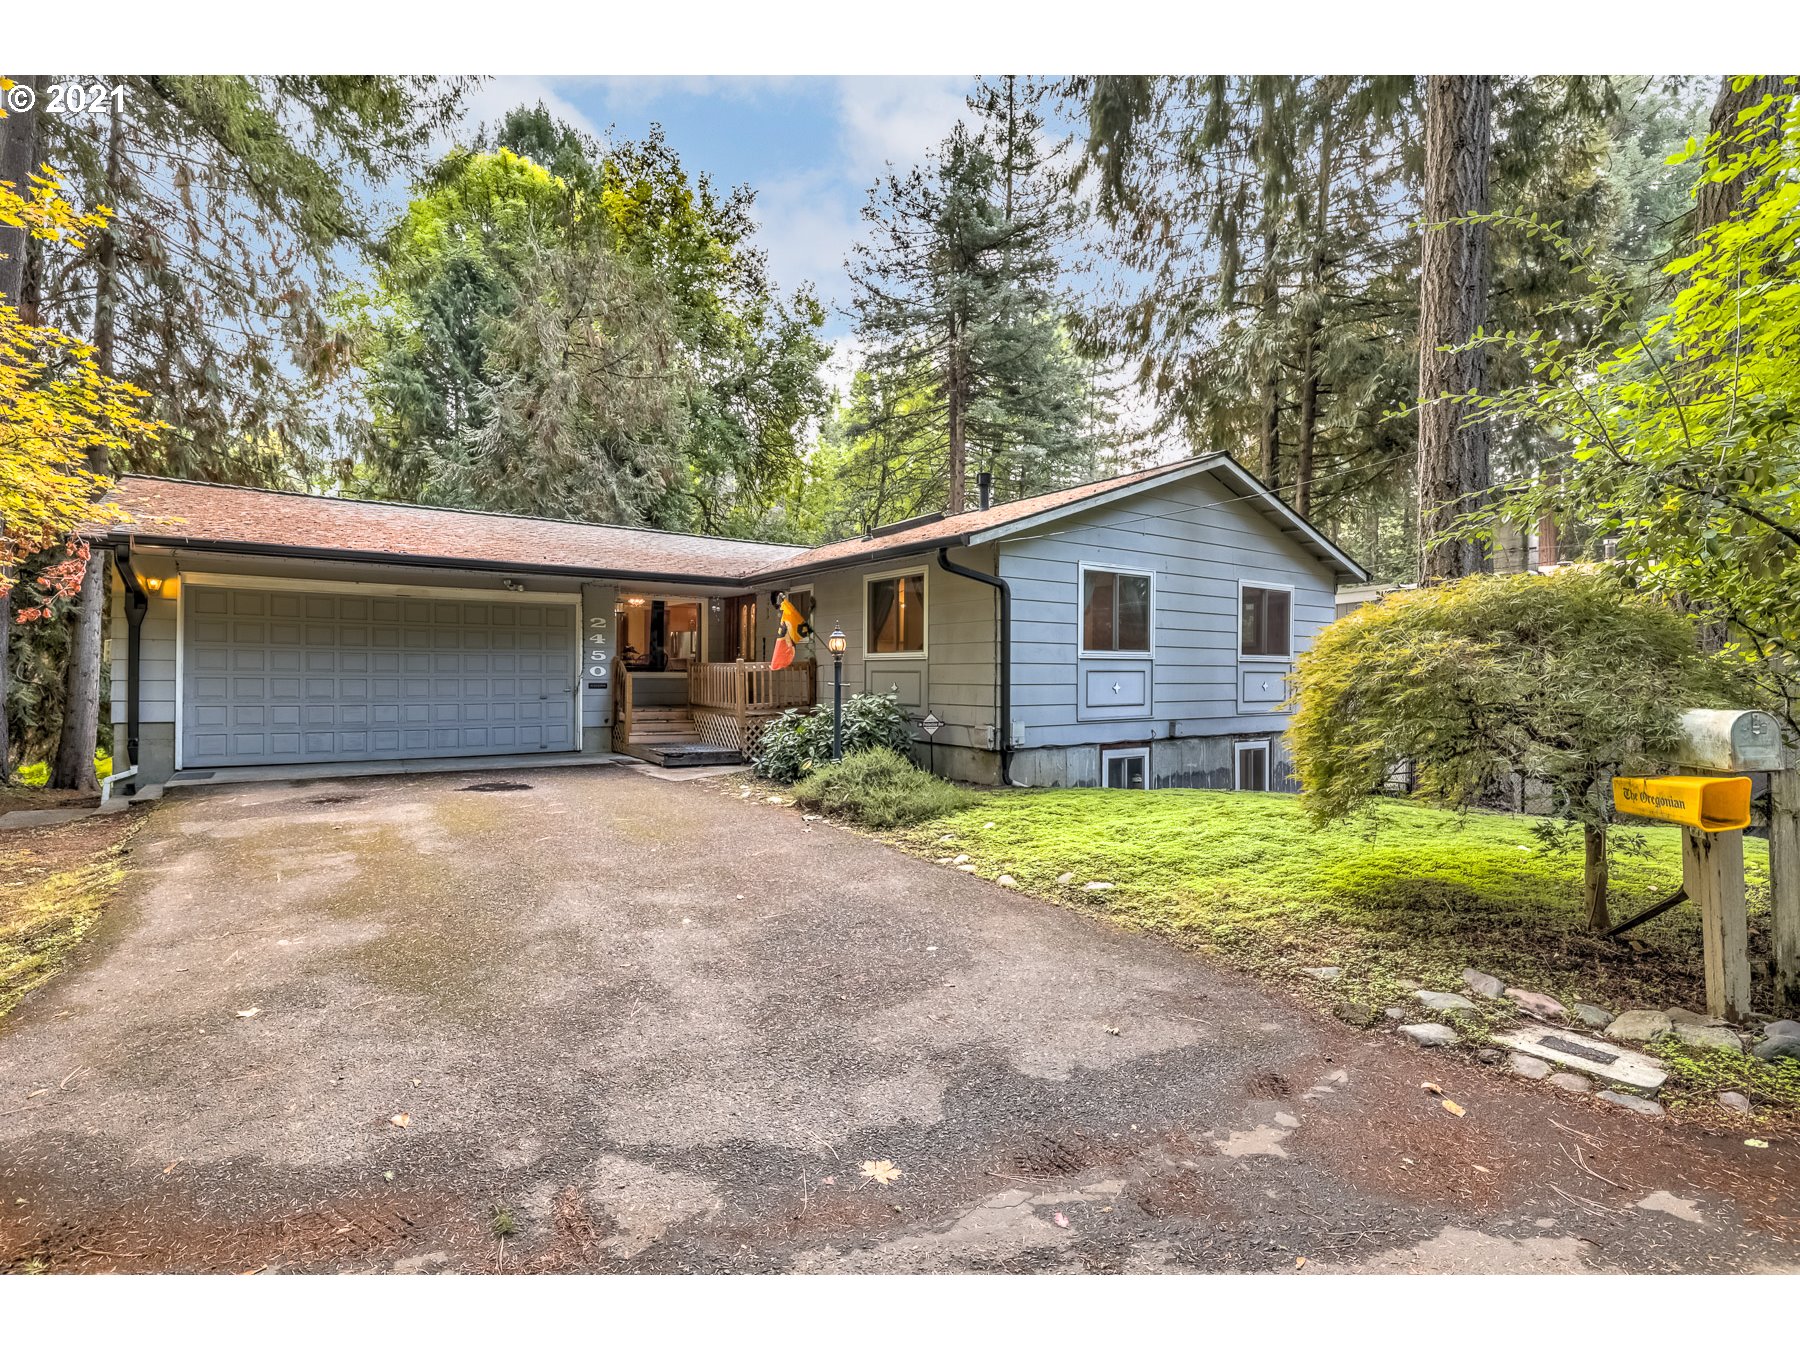 2450 SW 178TH AVE (1 of 32)